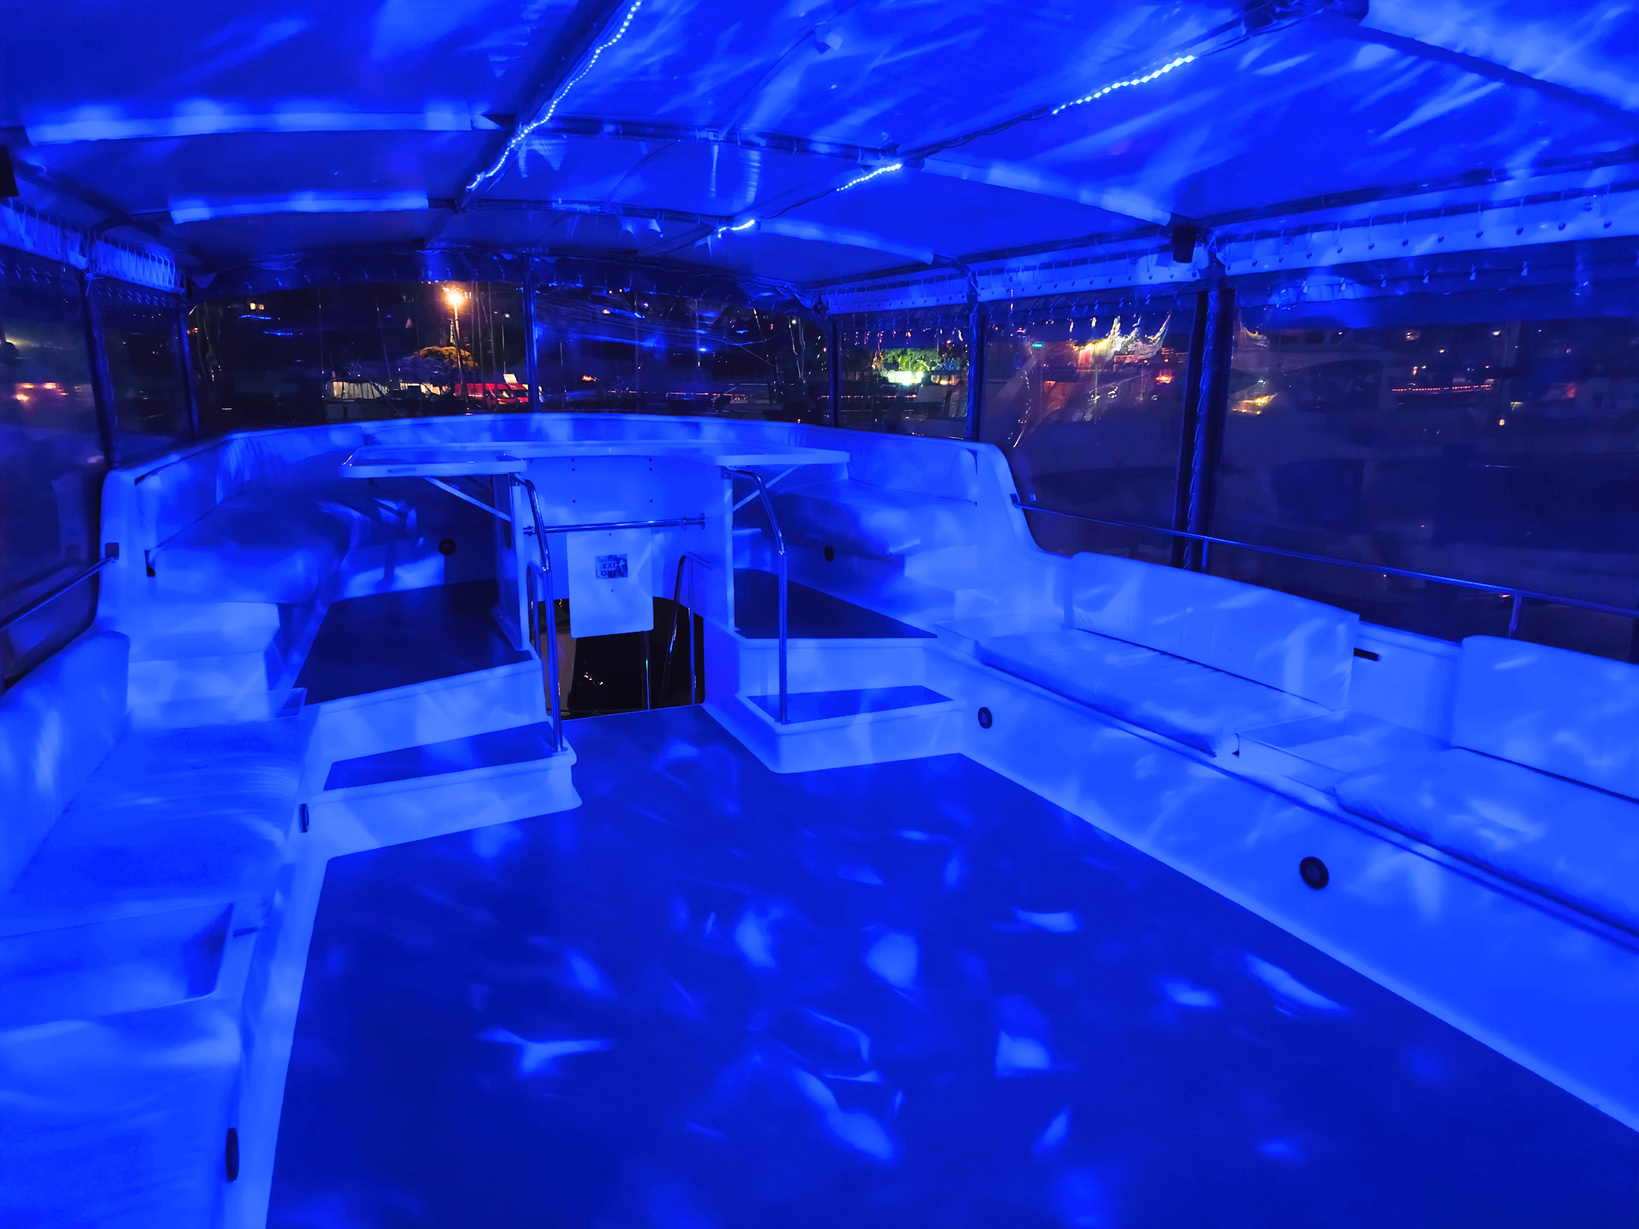 Blue Pattern Projection, Lighting, Festival, Party, Clubbing, Night Out 